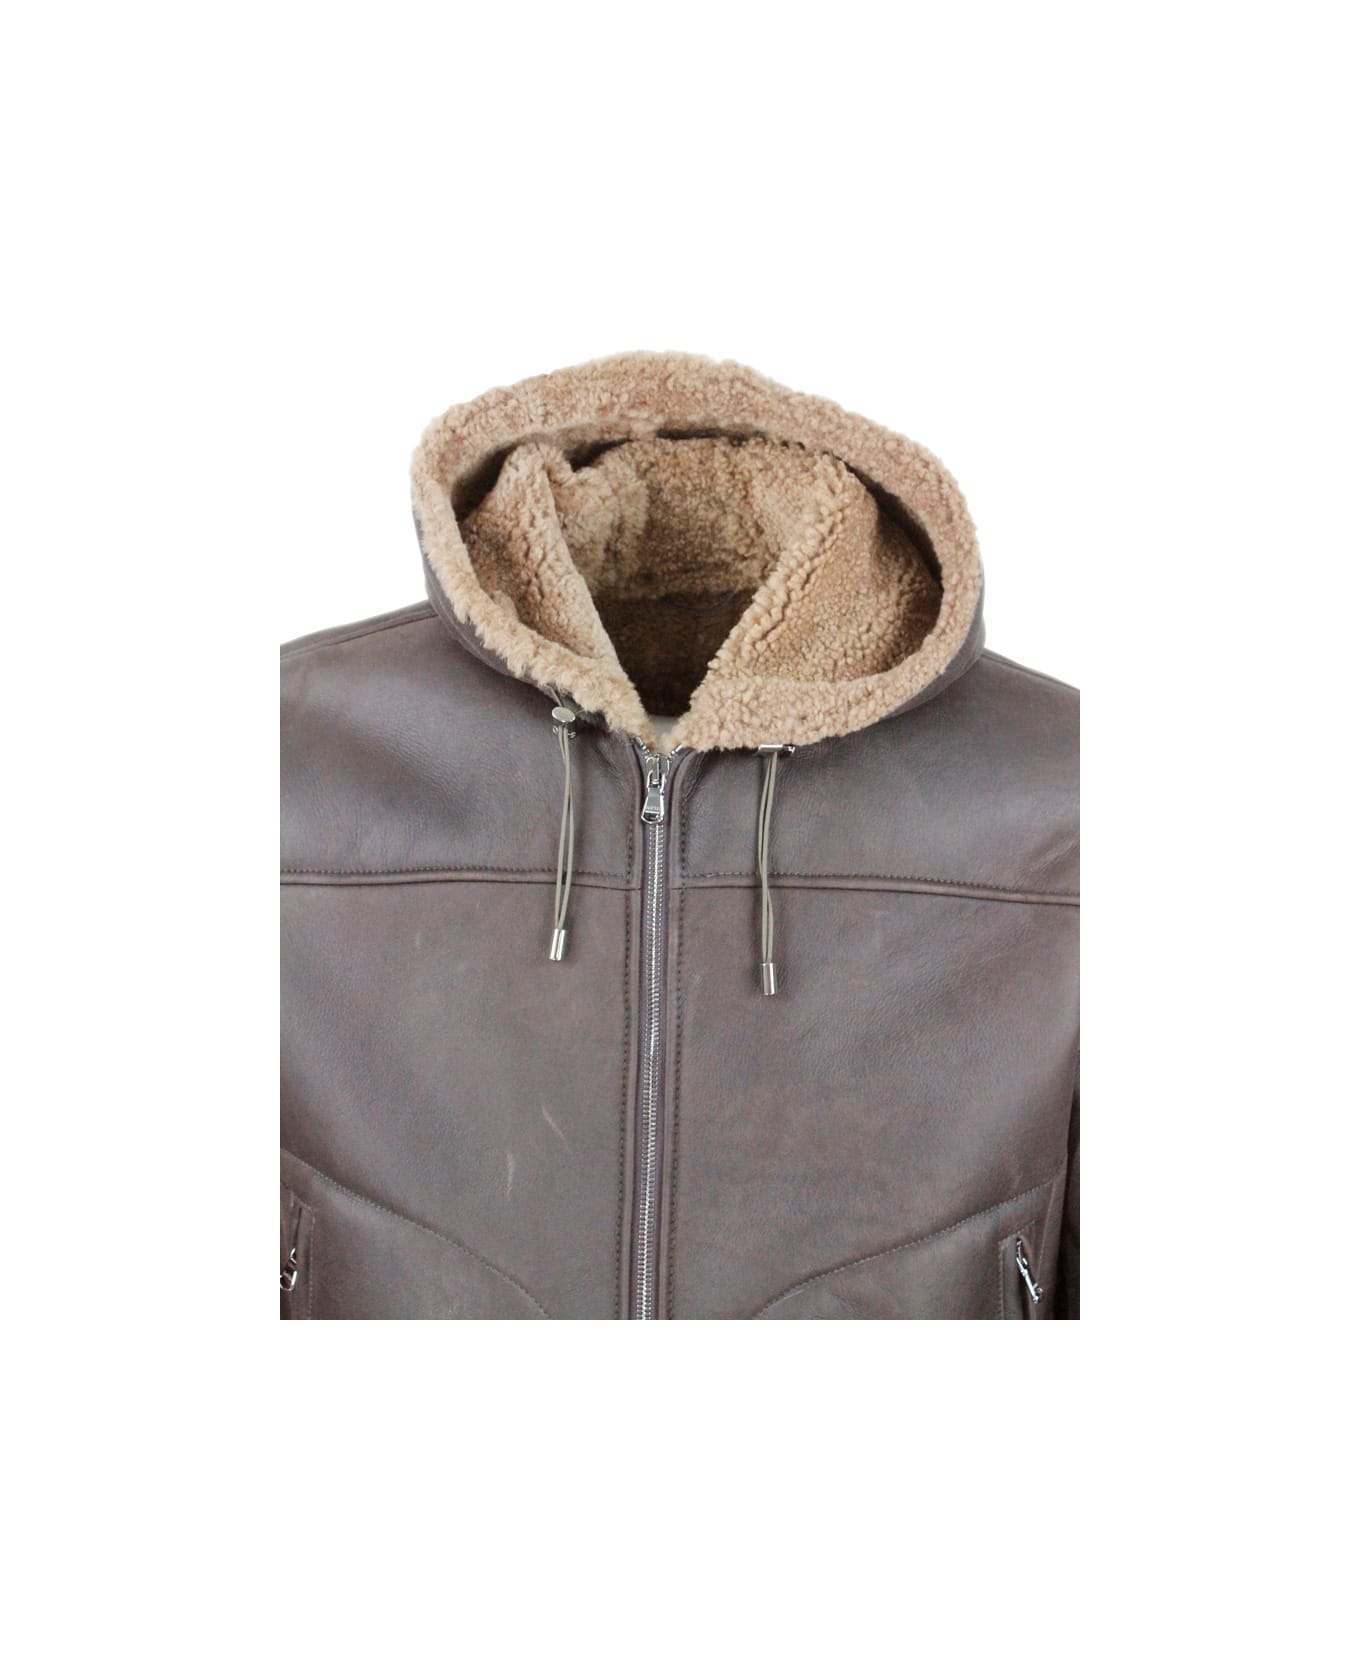 Barba Napoli Shearling Bomber Jacket With Hood With Drawstring And Trims In Stretch Knit And Zip Closure - Brown